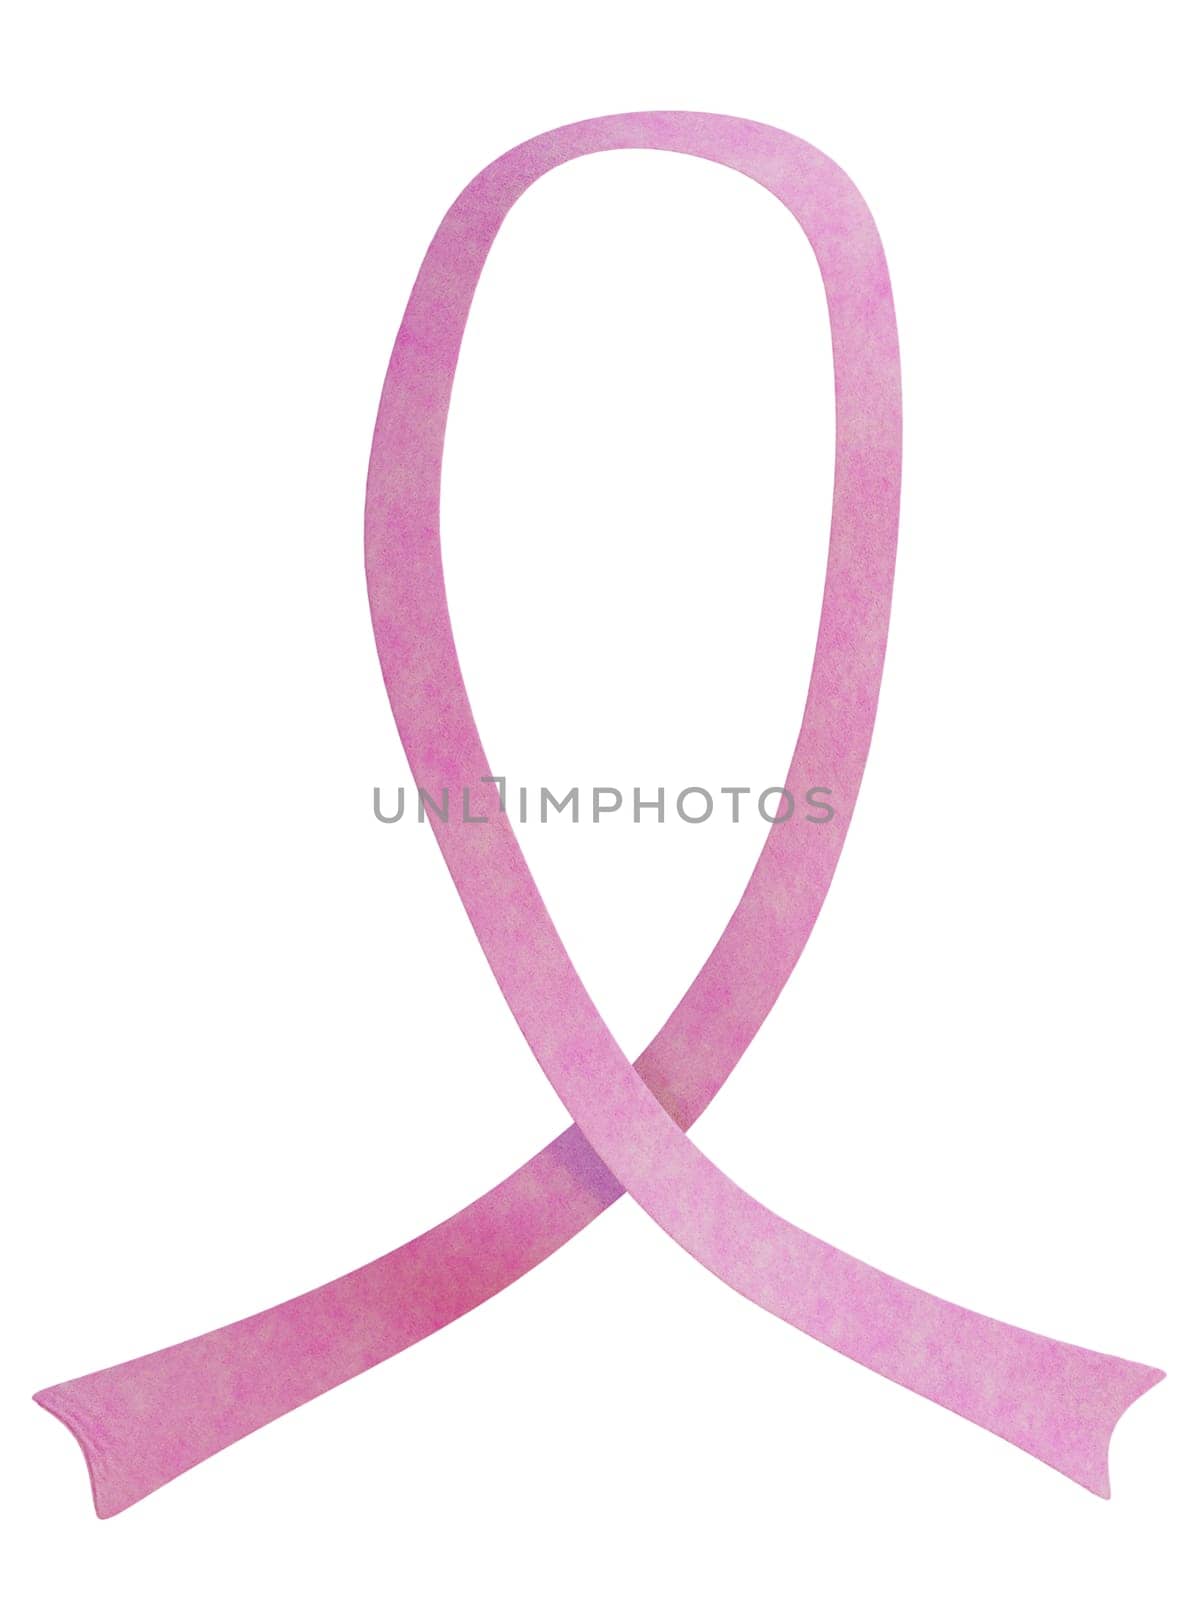 Realistic pink ribbon for breast cancer awareness symbol 3d rendering isolated on white background. Clipping path.